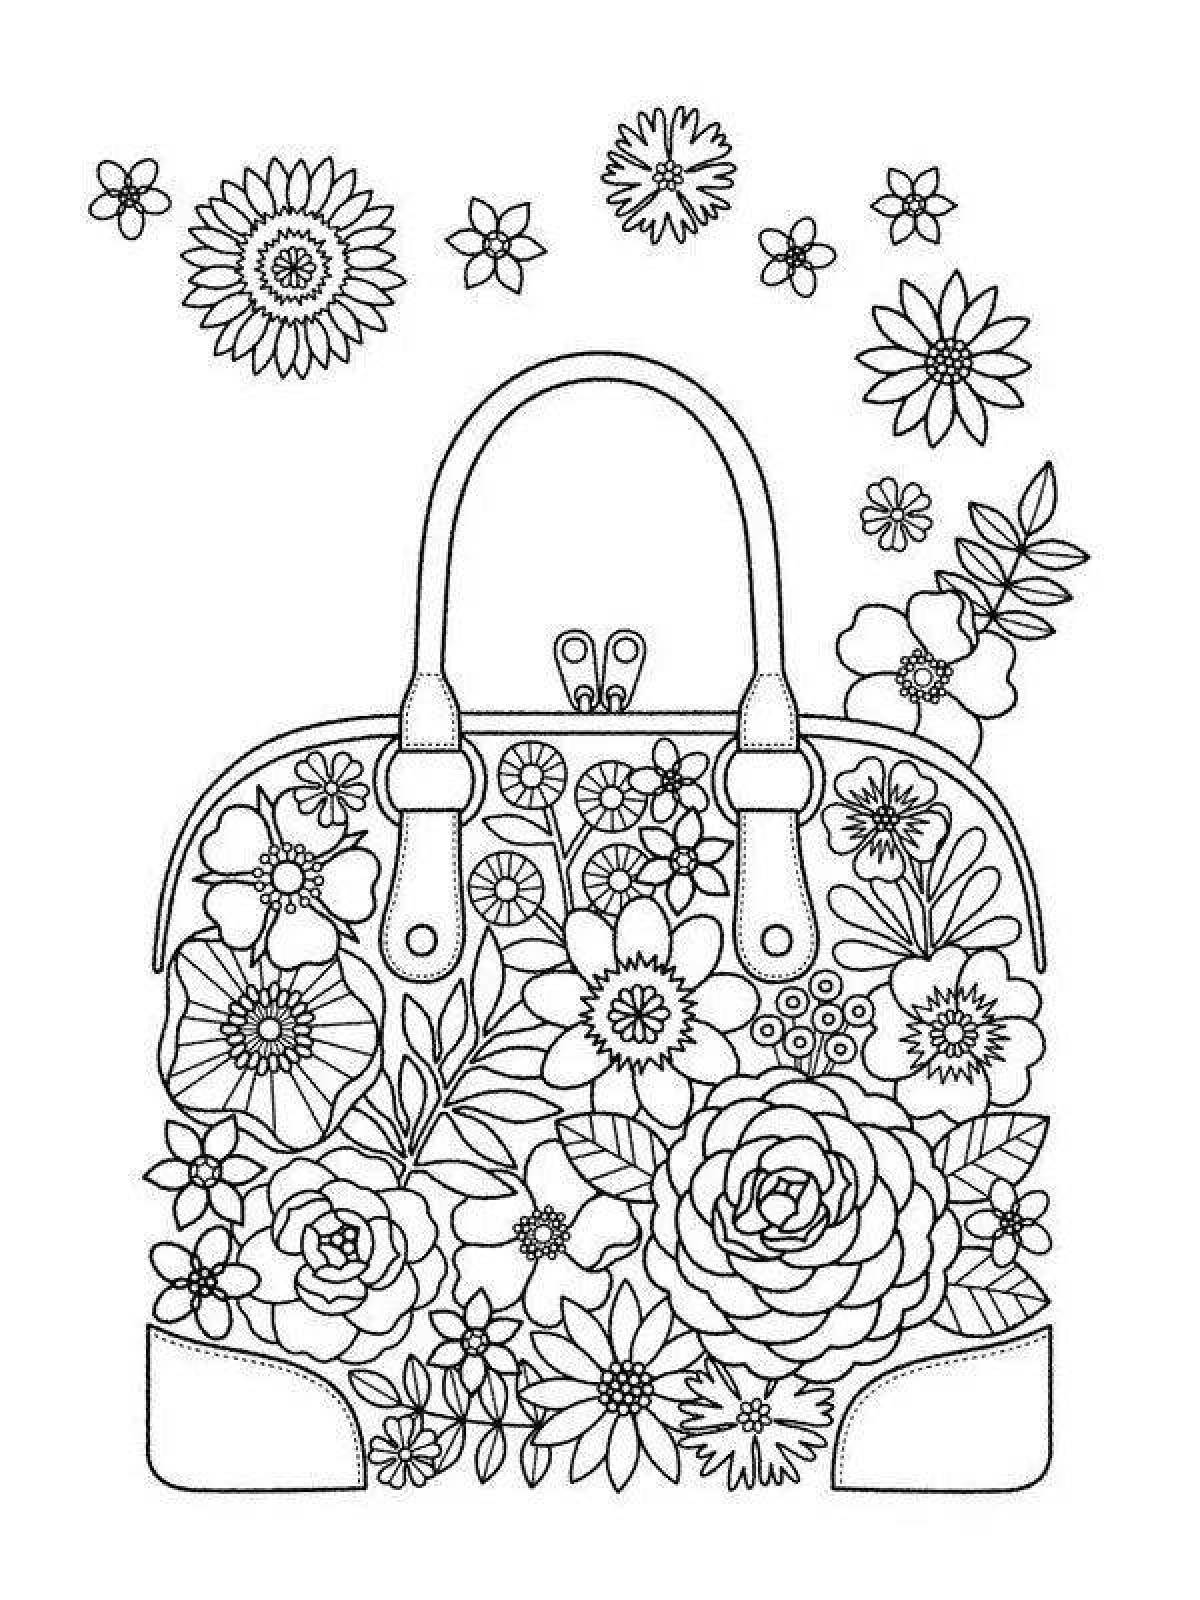 Fabulous coloring pages of bags for kids